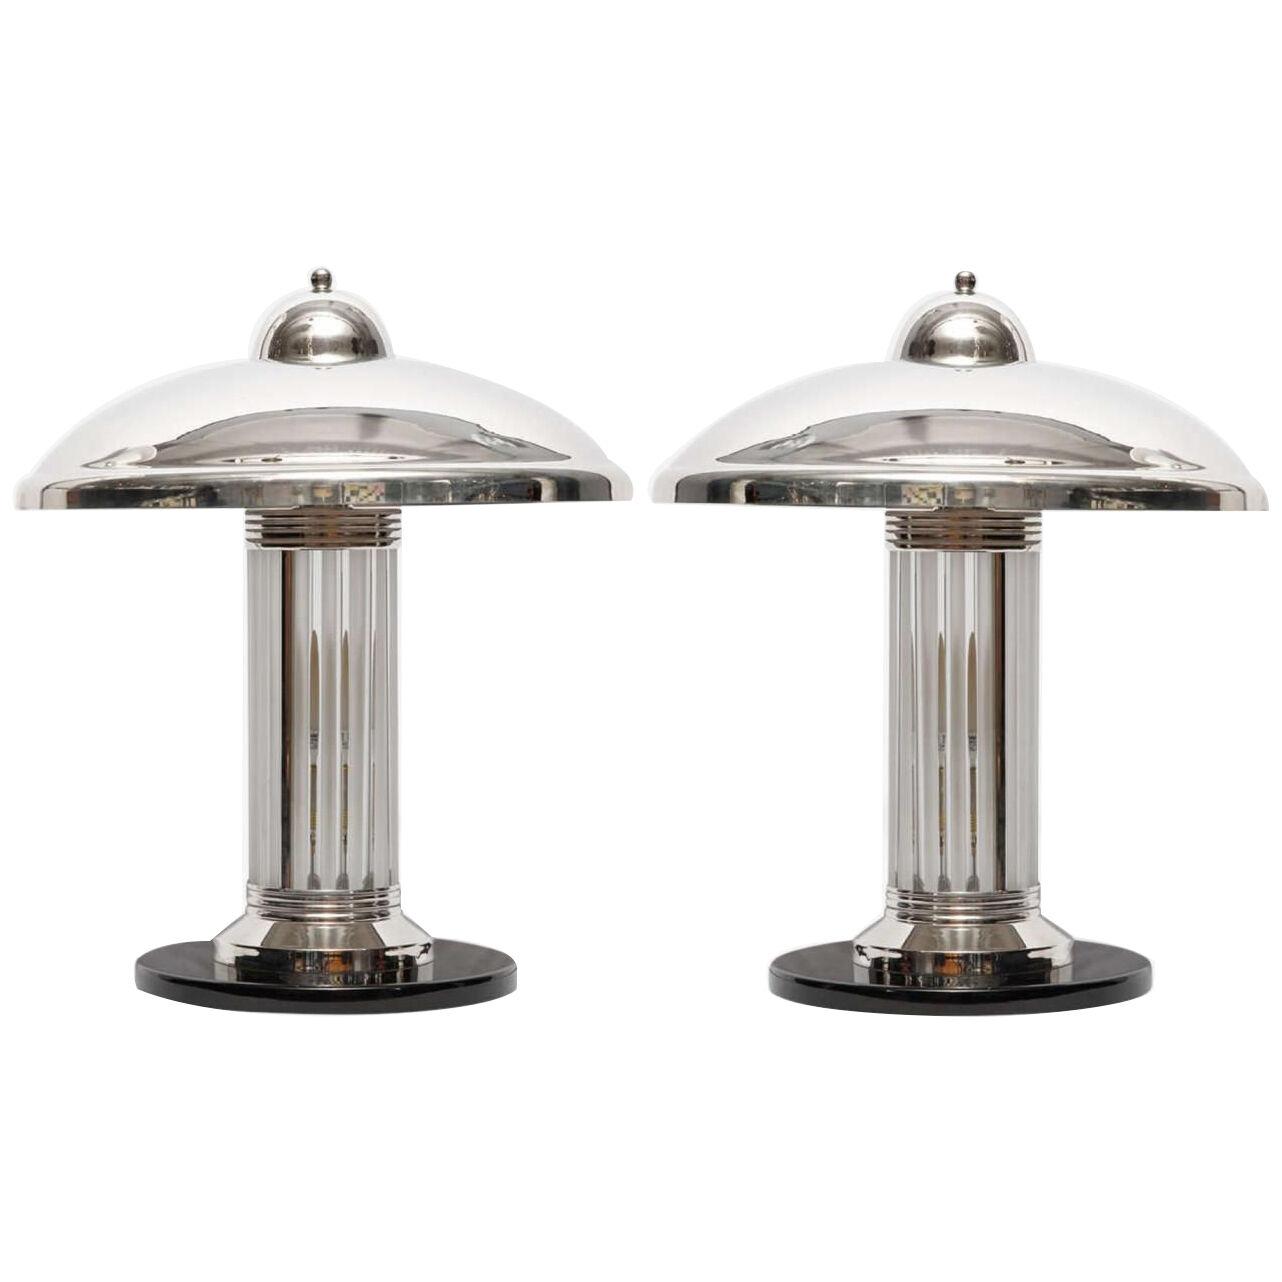 Pair of Art Deco style chrome and glass table tamps